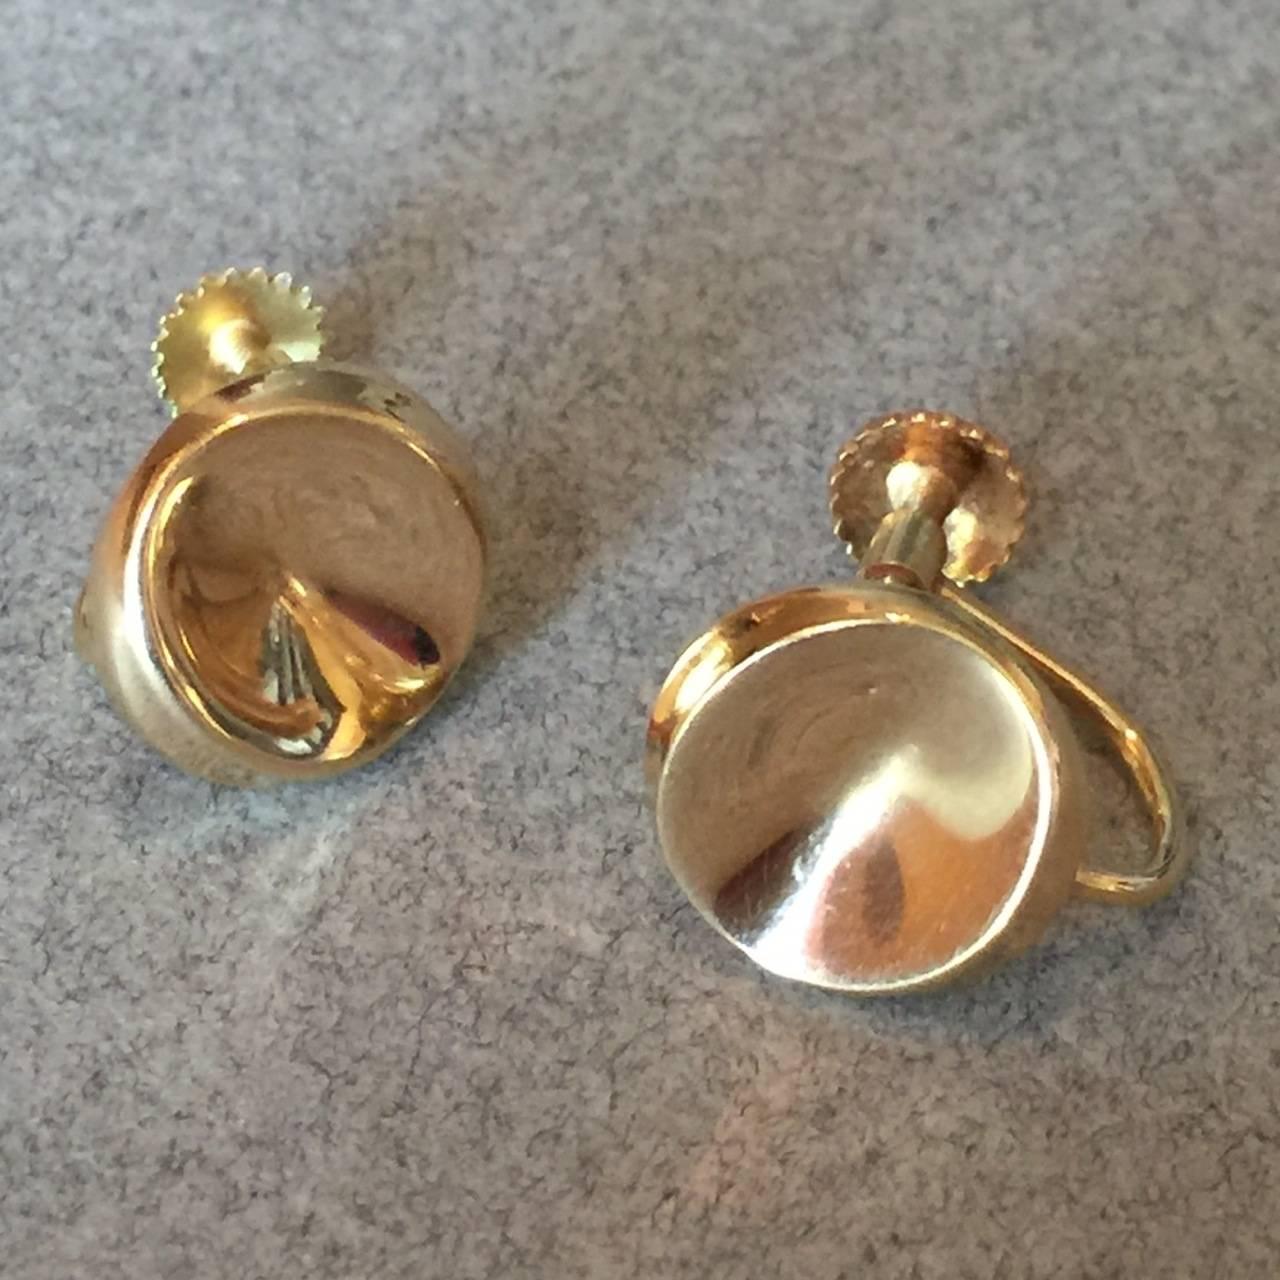 Georg Jensen 18K Earring No. 1136D by Nanna Ditzel

They catch the light beautifully in the curved center.

Screw back.

Dimensions: .44